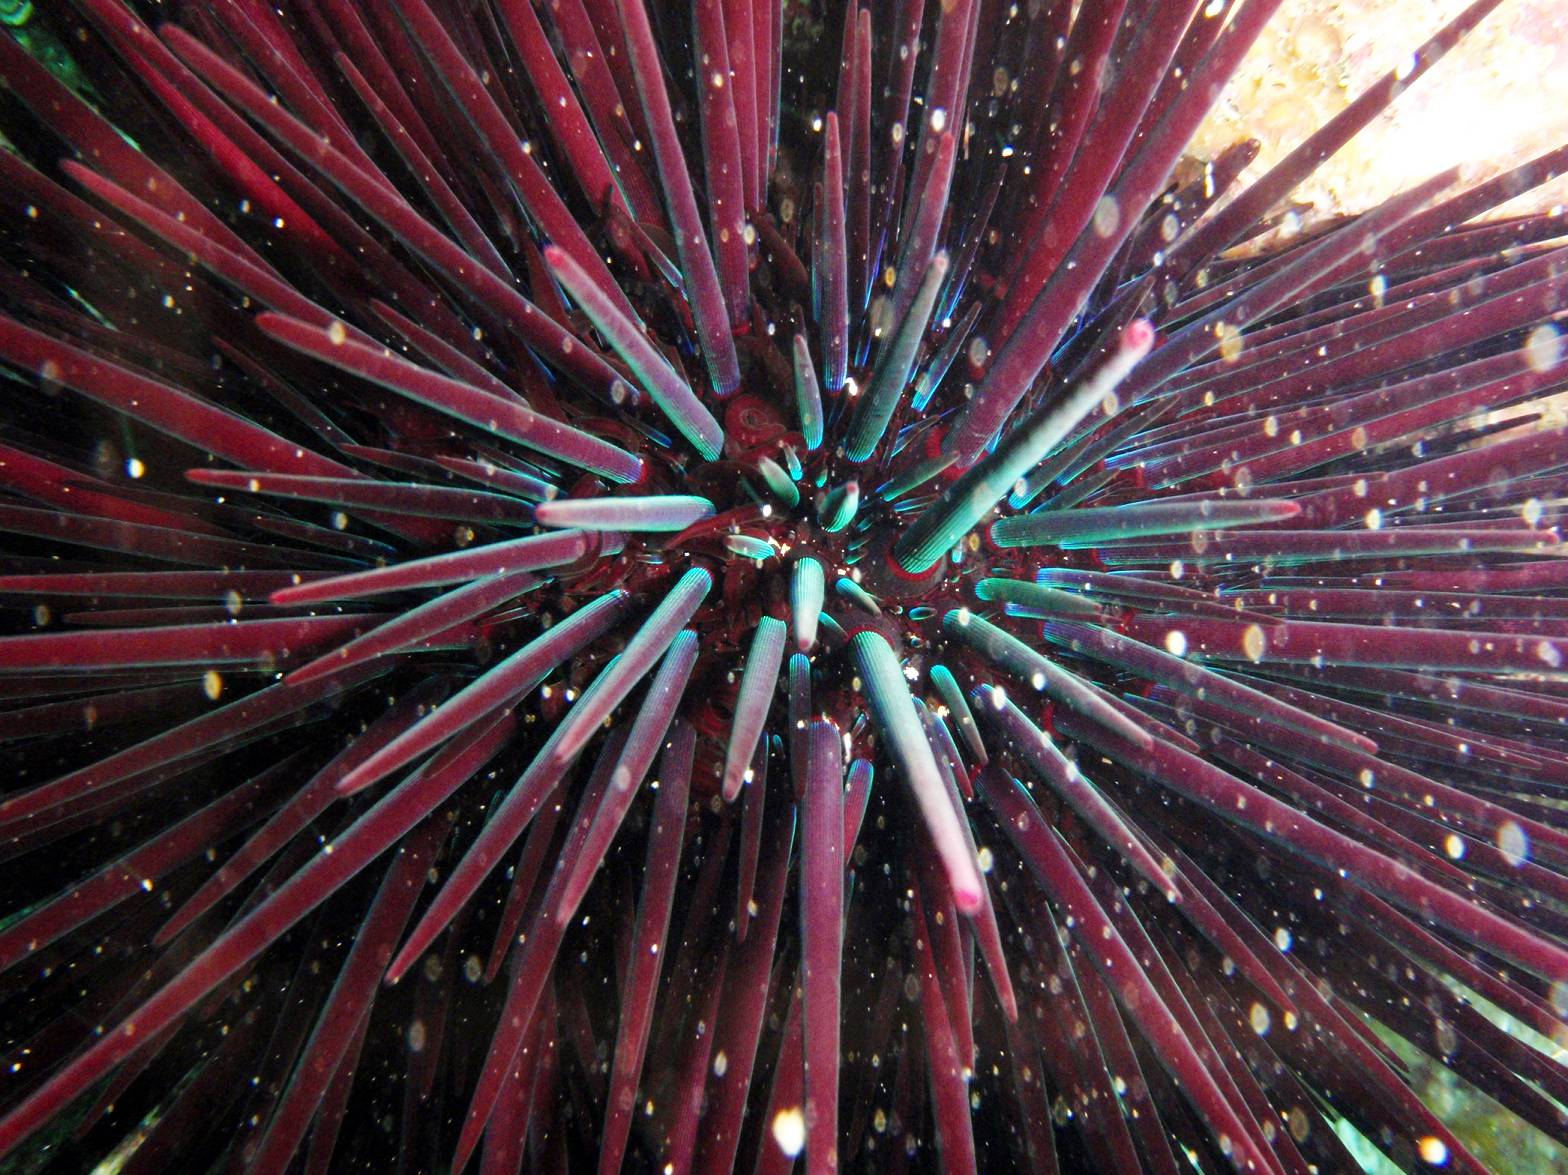 Long-Spined Sea Urchins